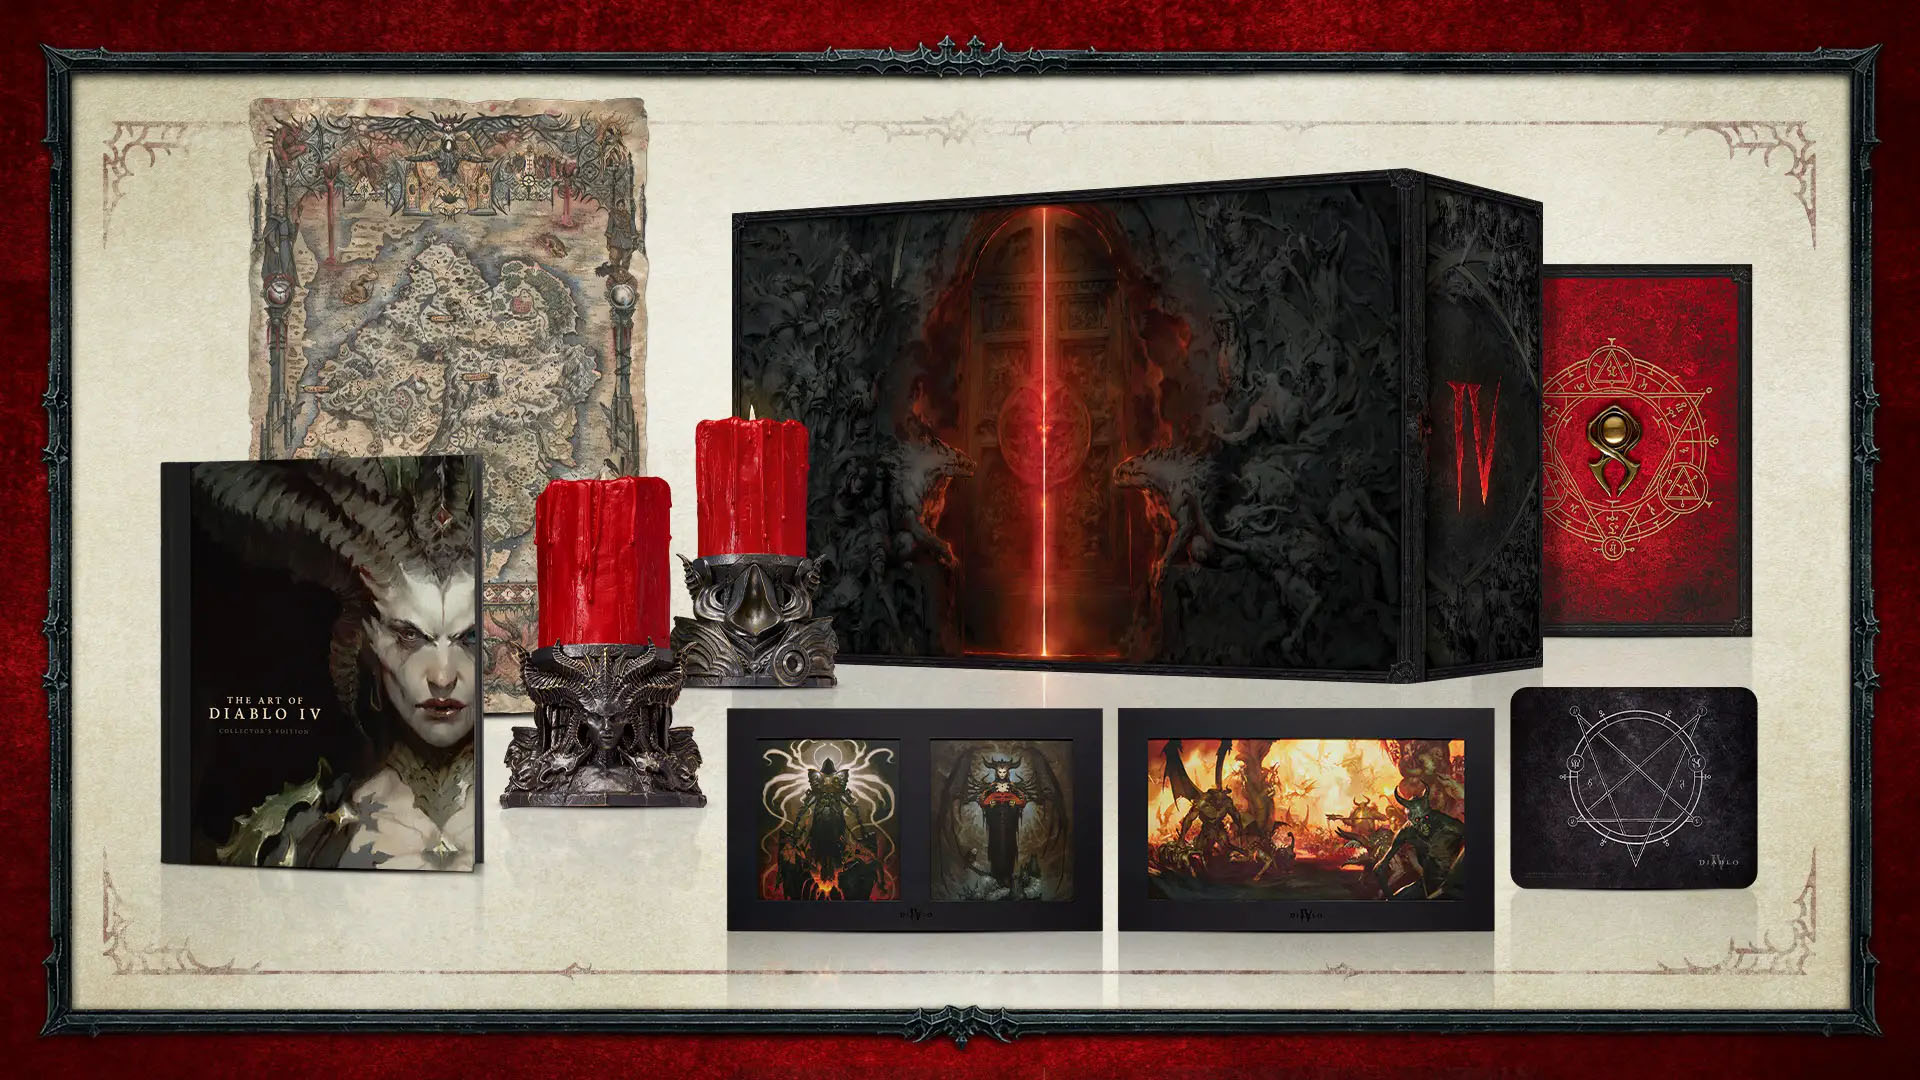 Diablo IV collector’s edition gets early unboxing videos